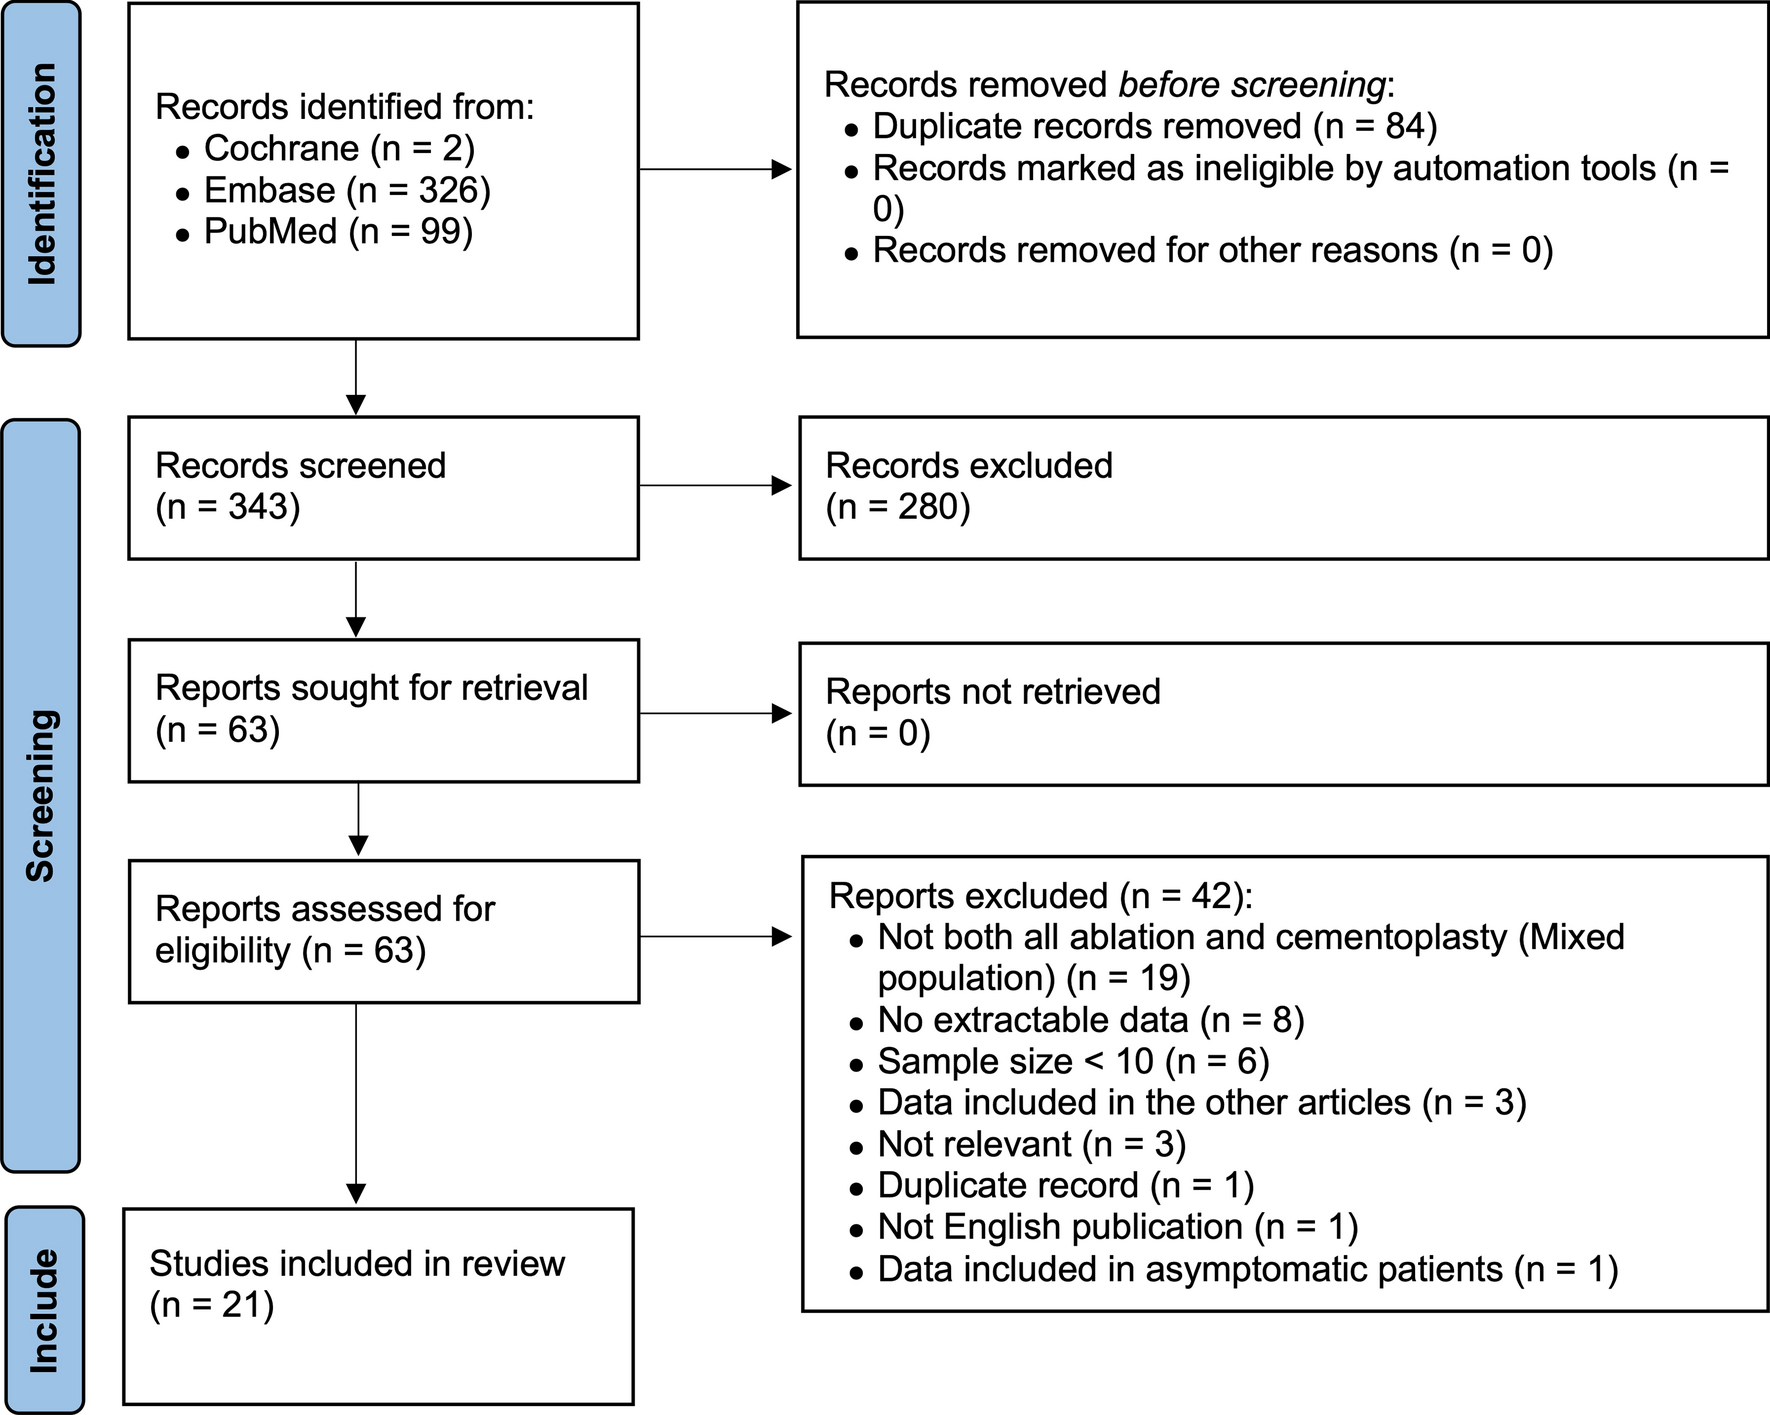 Analgesic efficacy and safety of percutaneous thermal ablation plus cementoplasty for painful bone metastases: a systematic review and meta-analysis